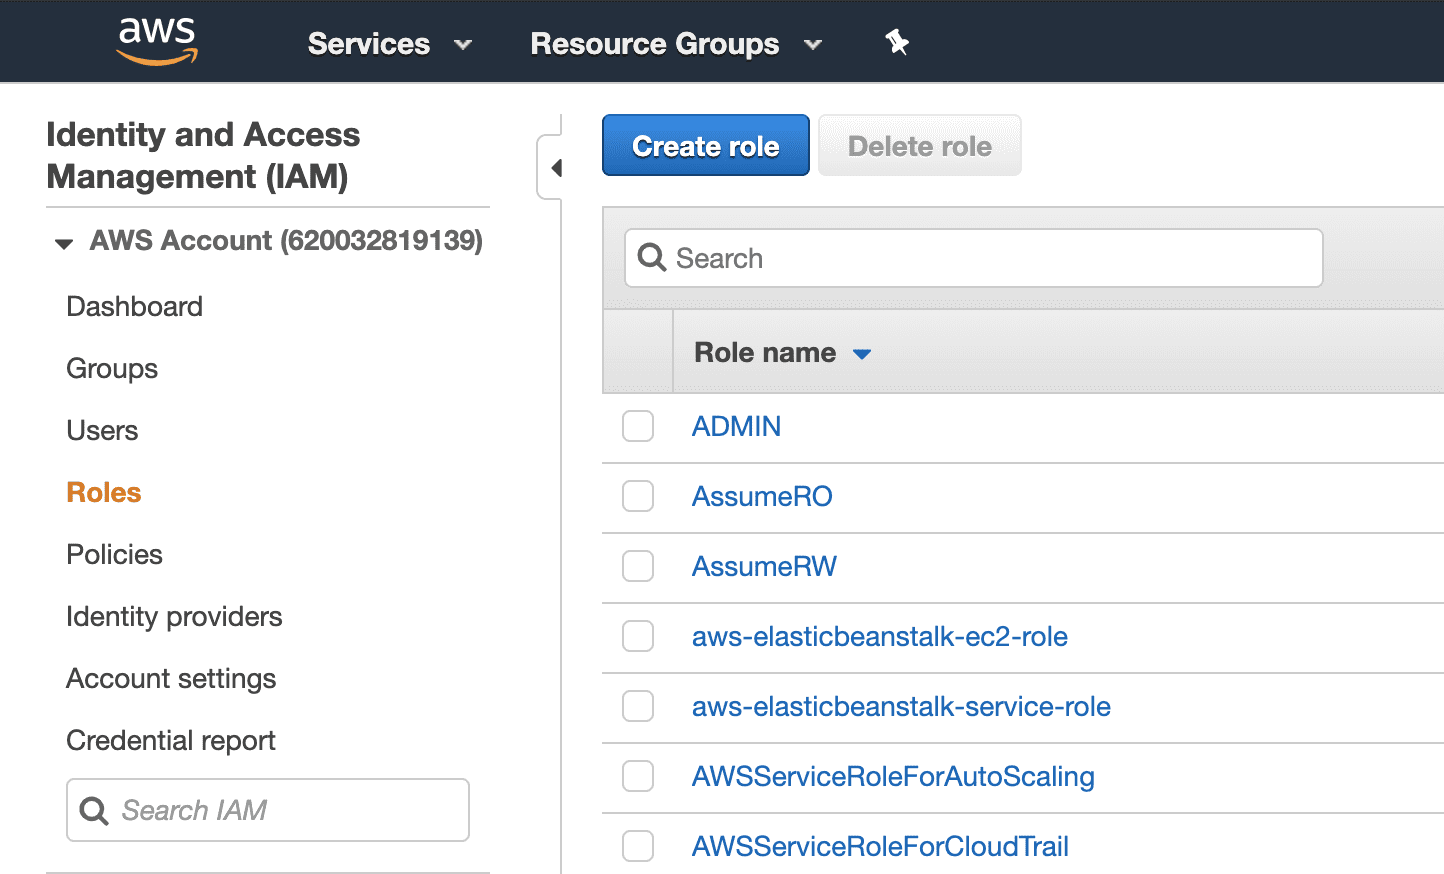 Creating role in IAM console